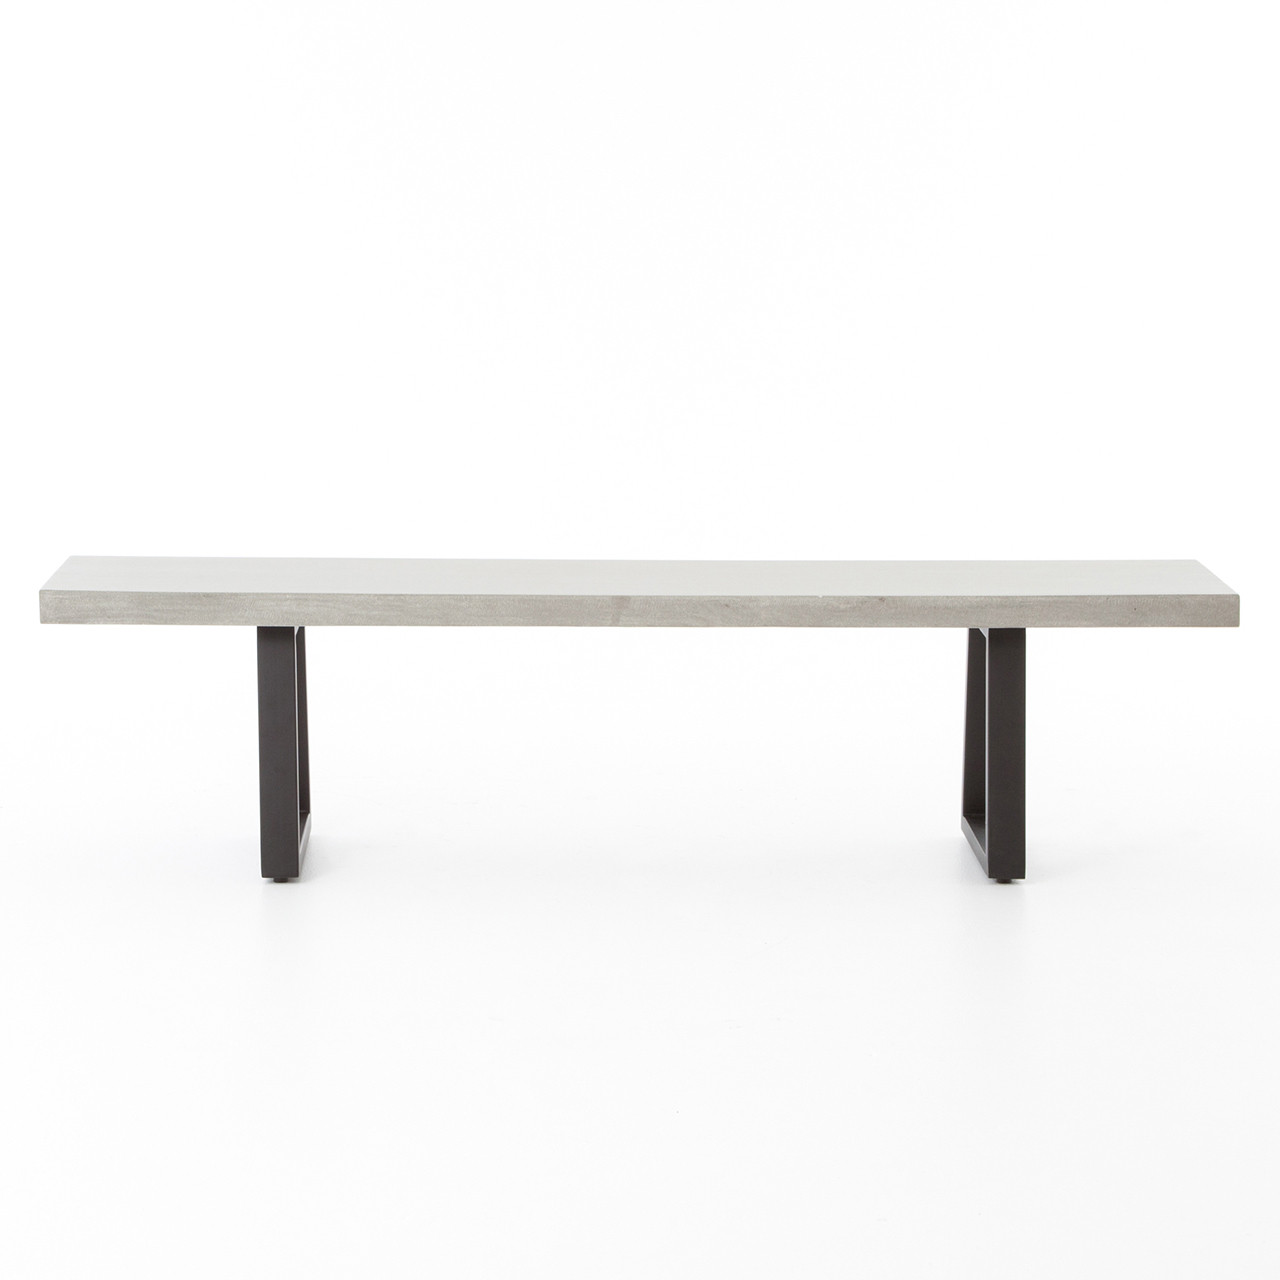 Lola Outdoor Dining Bench